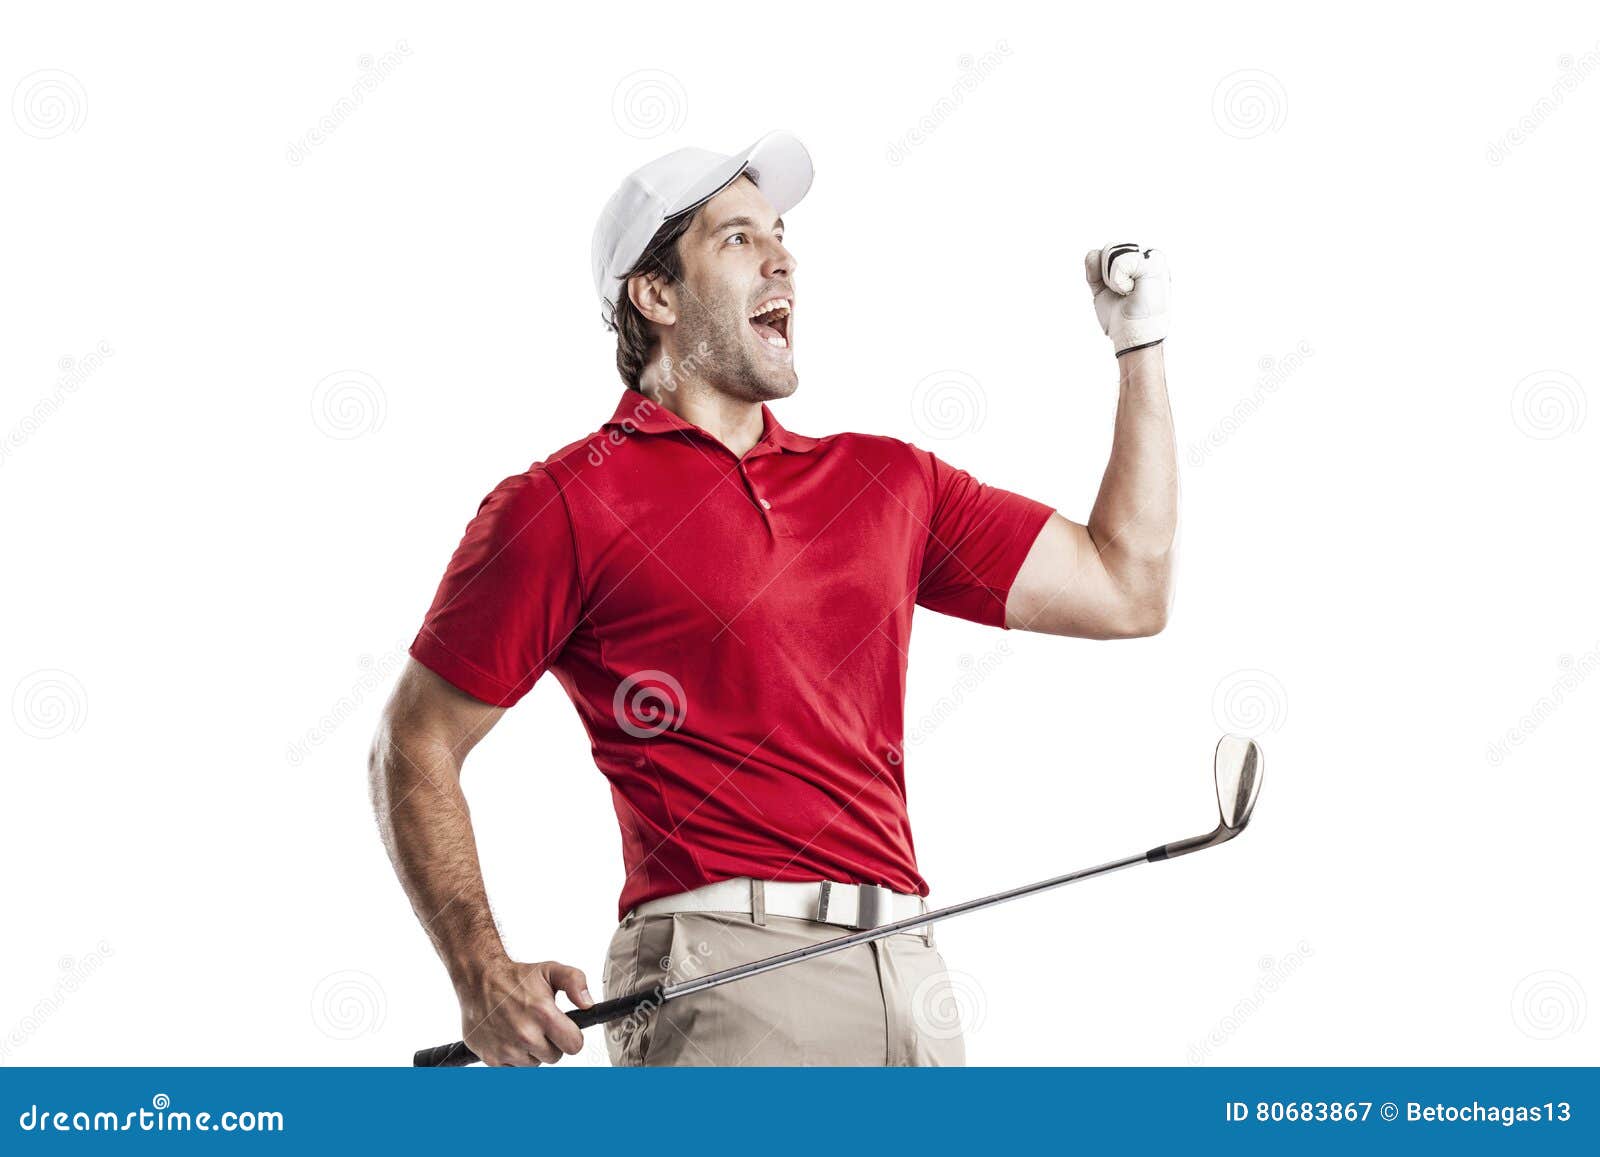 Golf Player stock image. Image of golfer, studio, person - 80683867